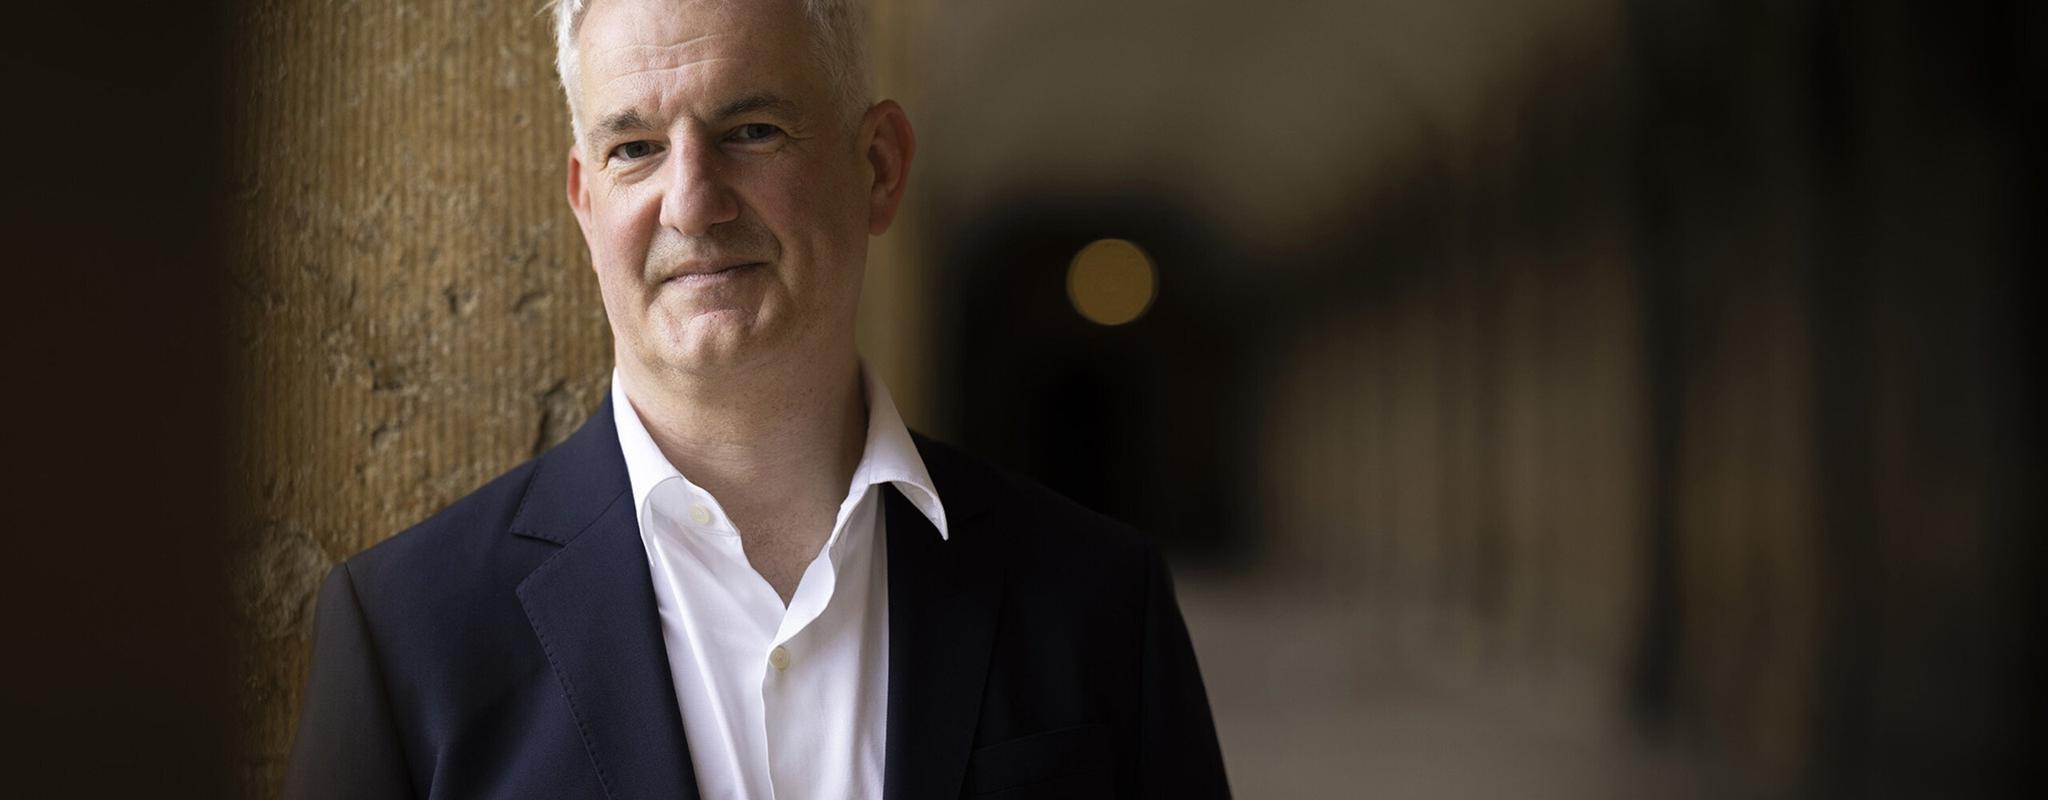 A middle aged man with white hair, a blazer and open collar shirt, stands leaning on a pillar in one of the Oxford University's grand stone hallways.